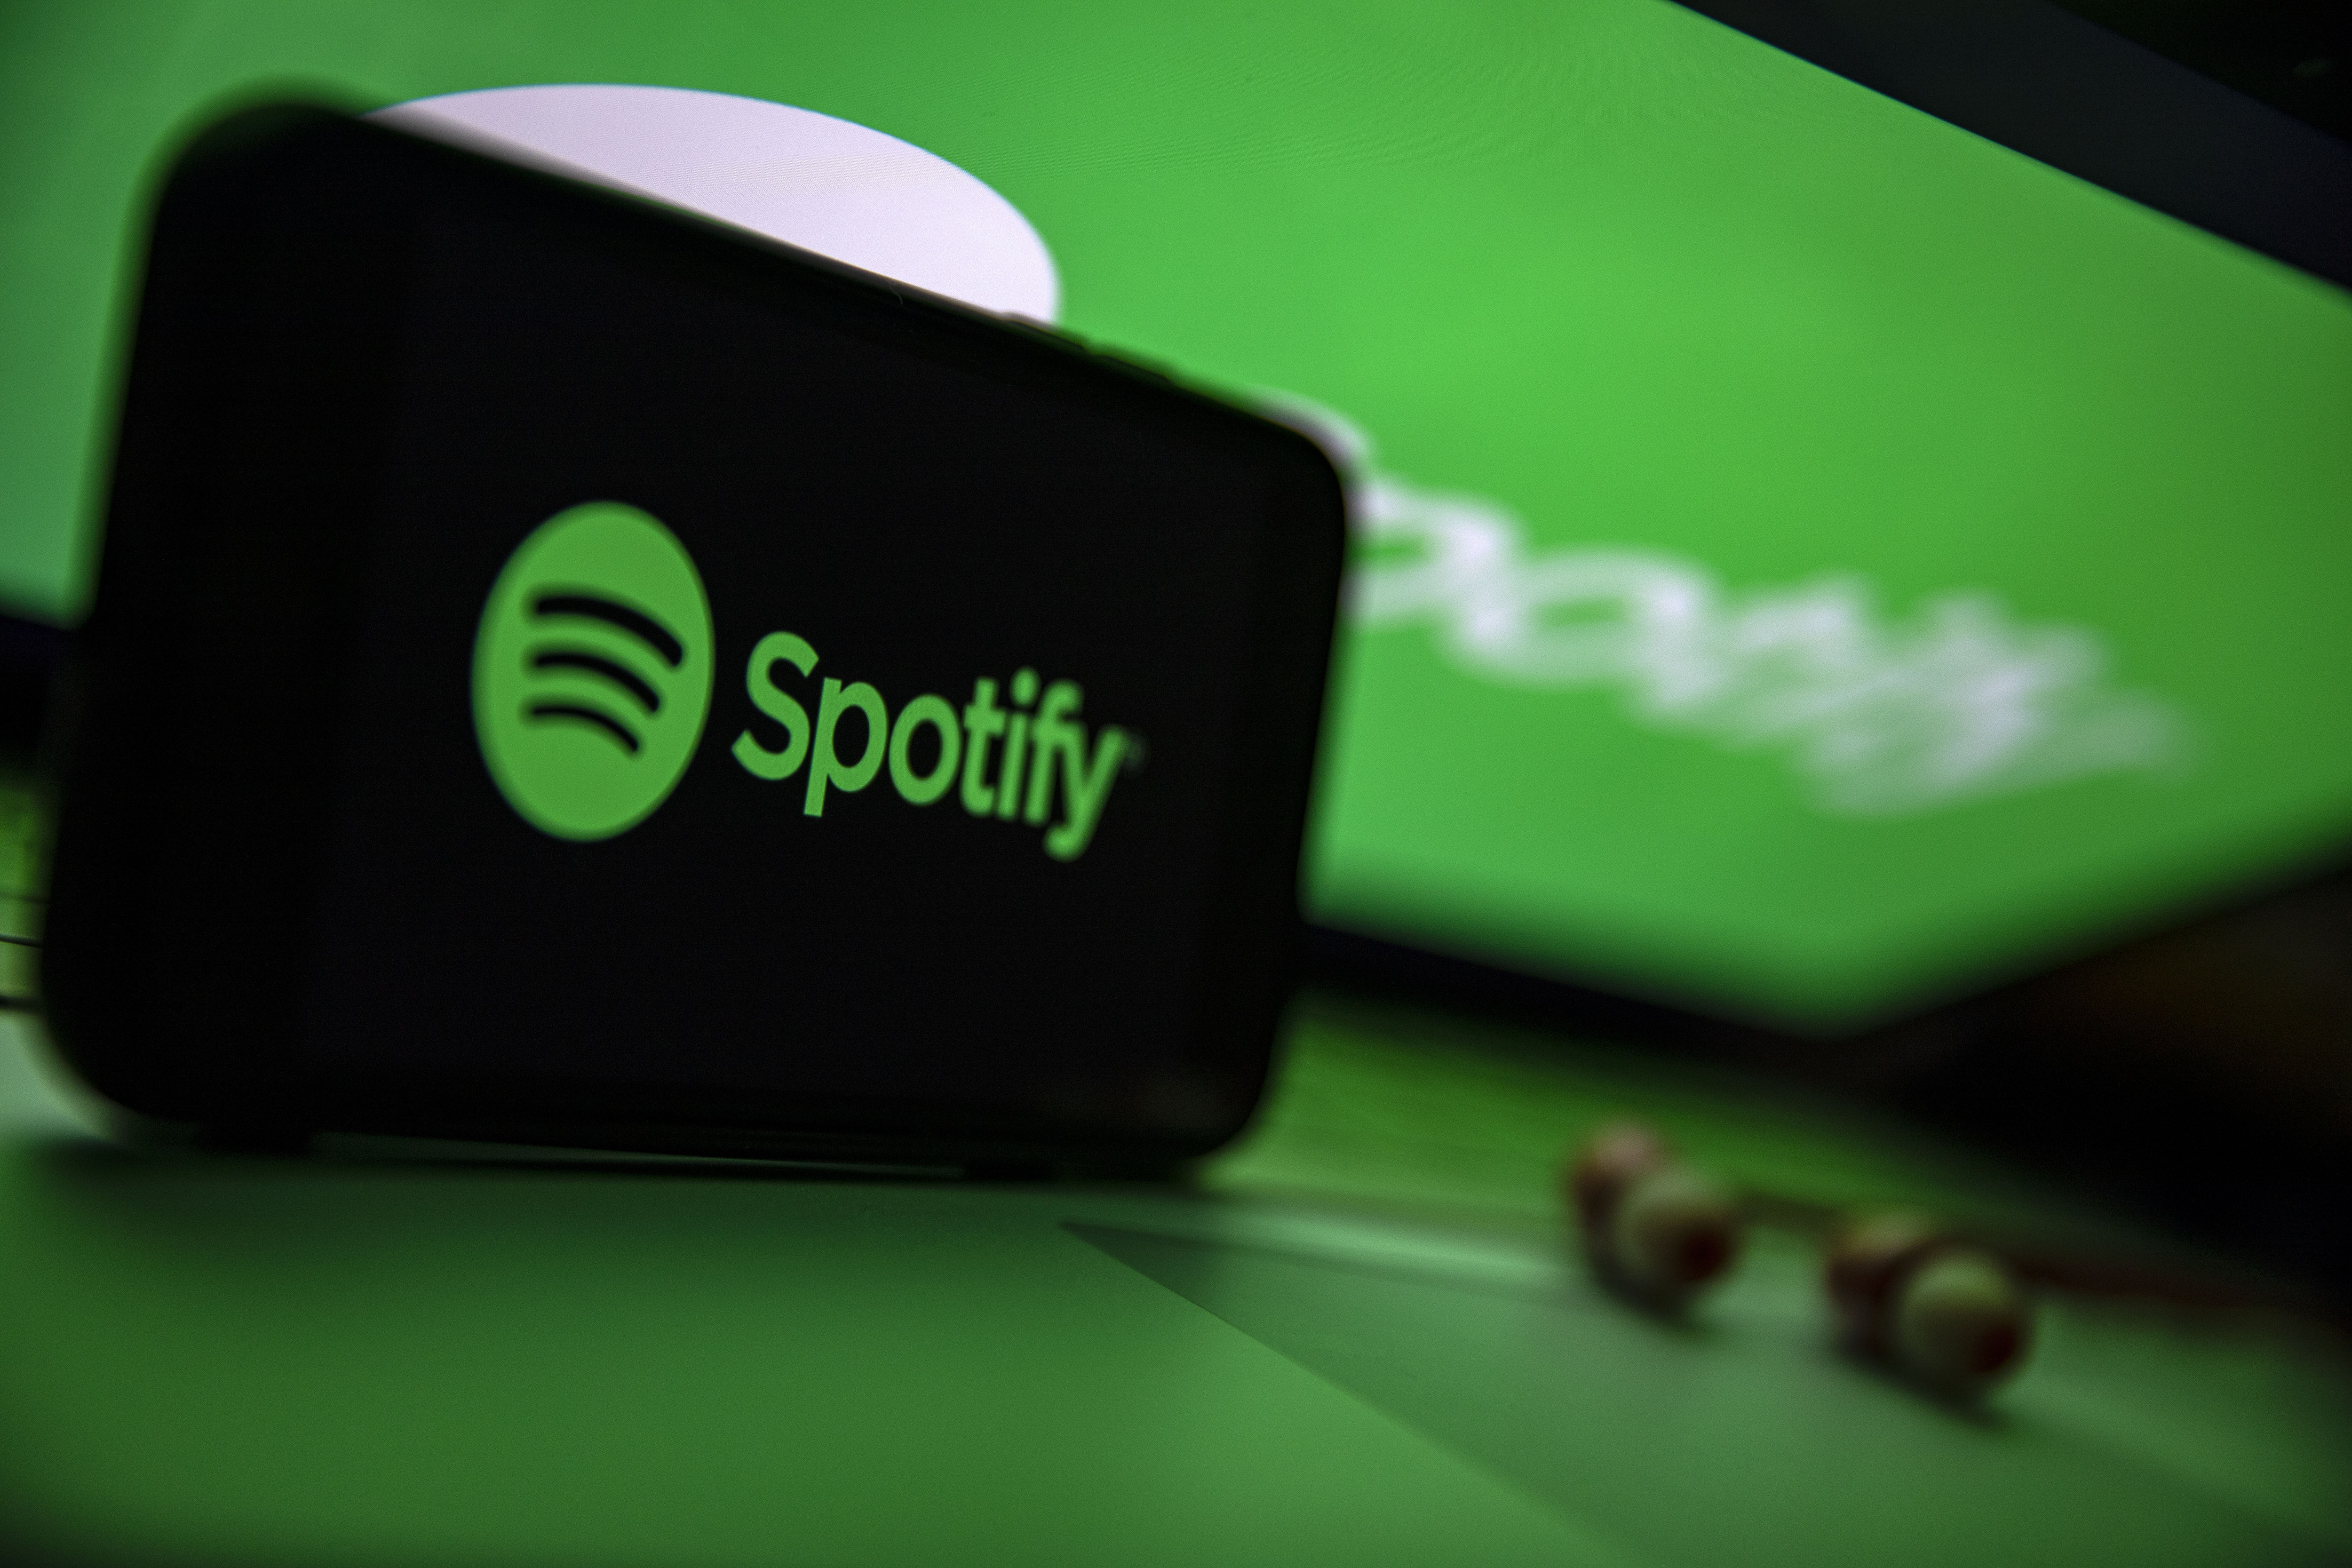 Spotify will host its next Stream On event on March 8th